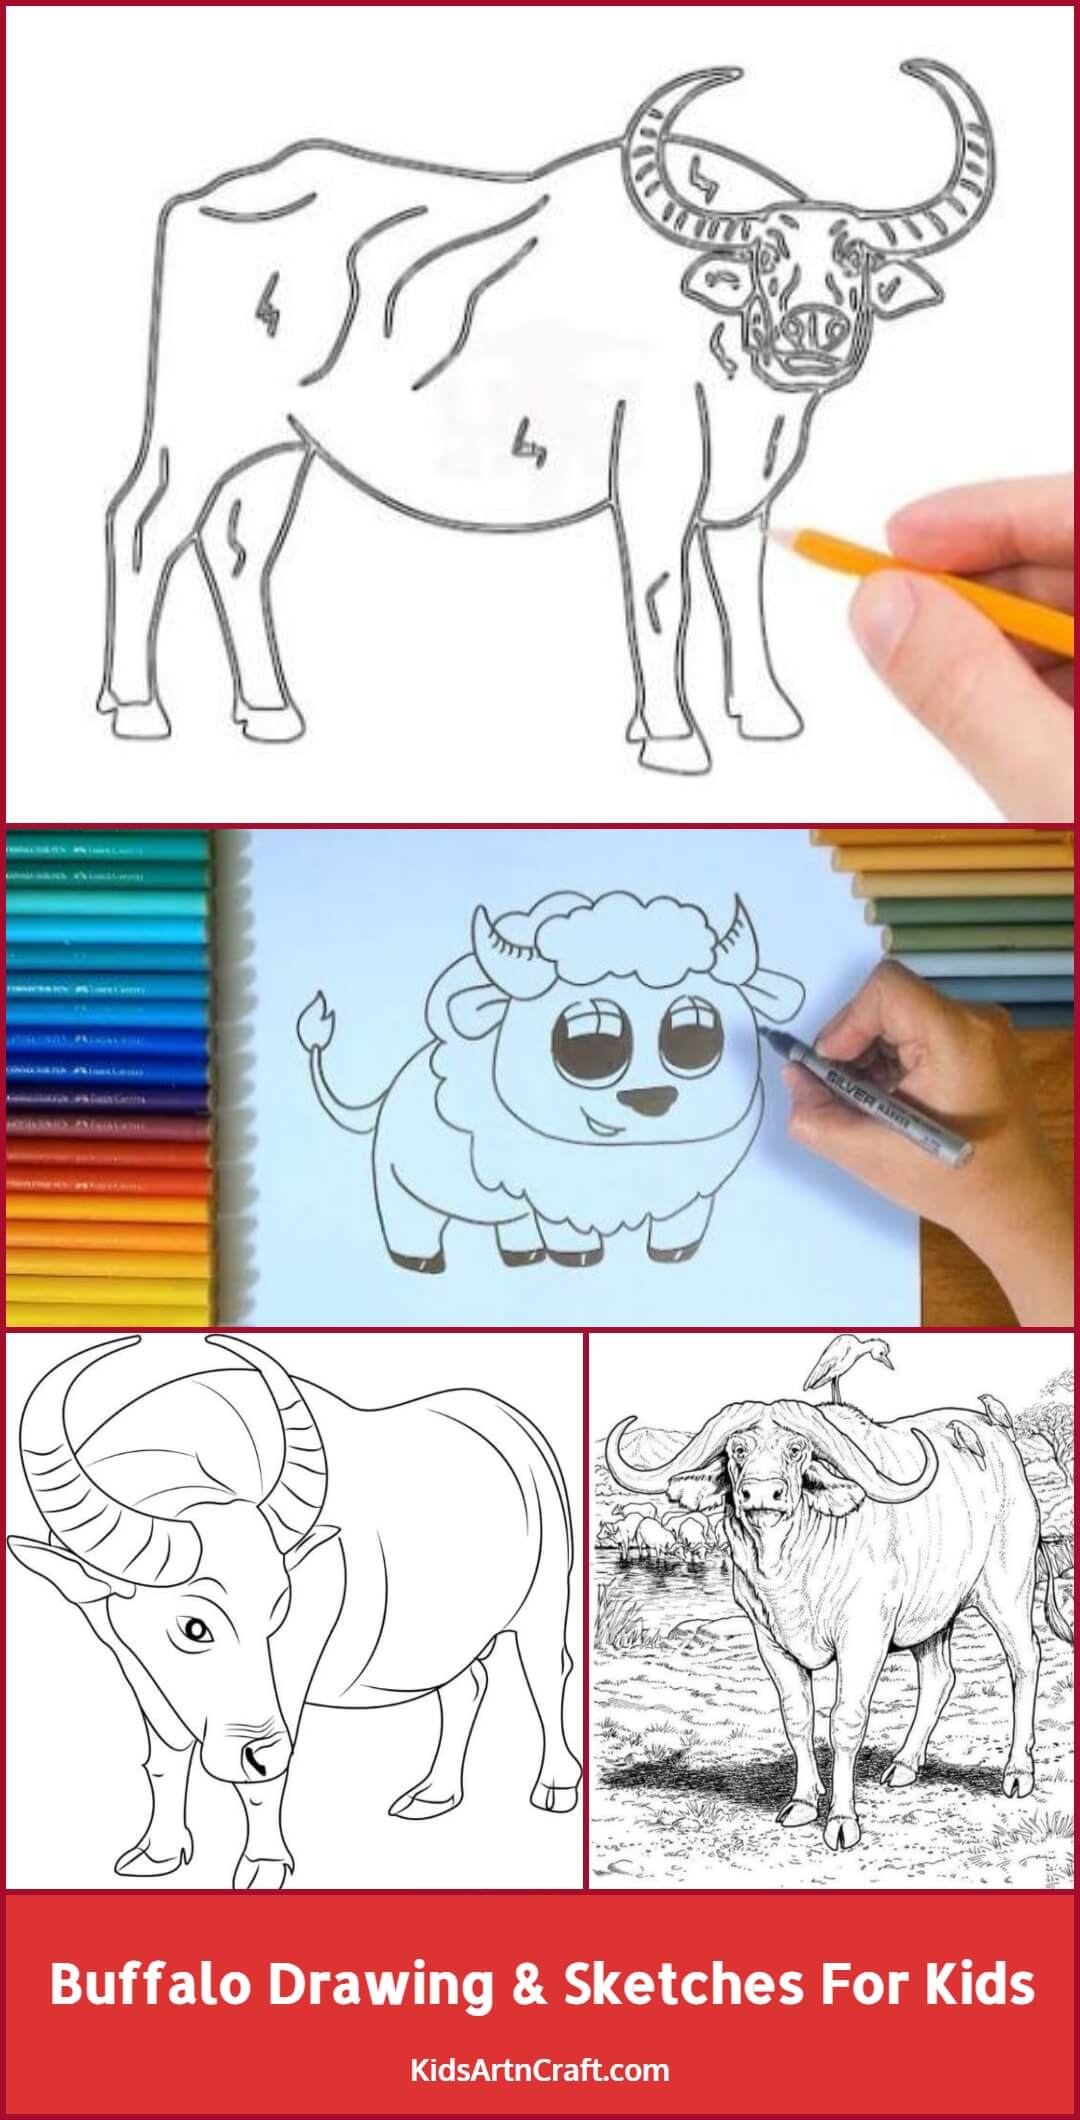 Buffalo Drawing & Sketches For Kids